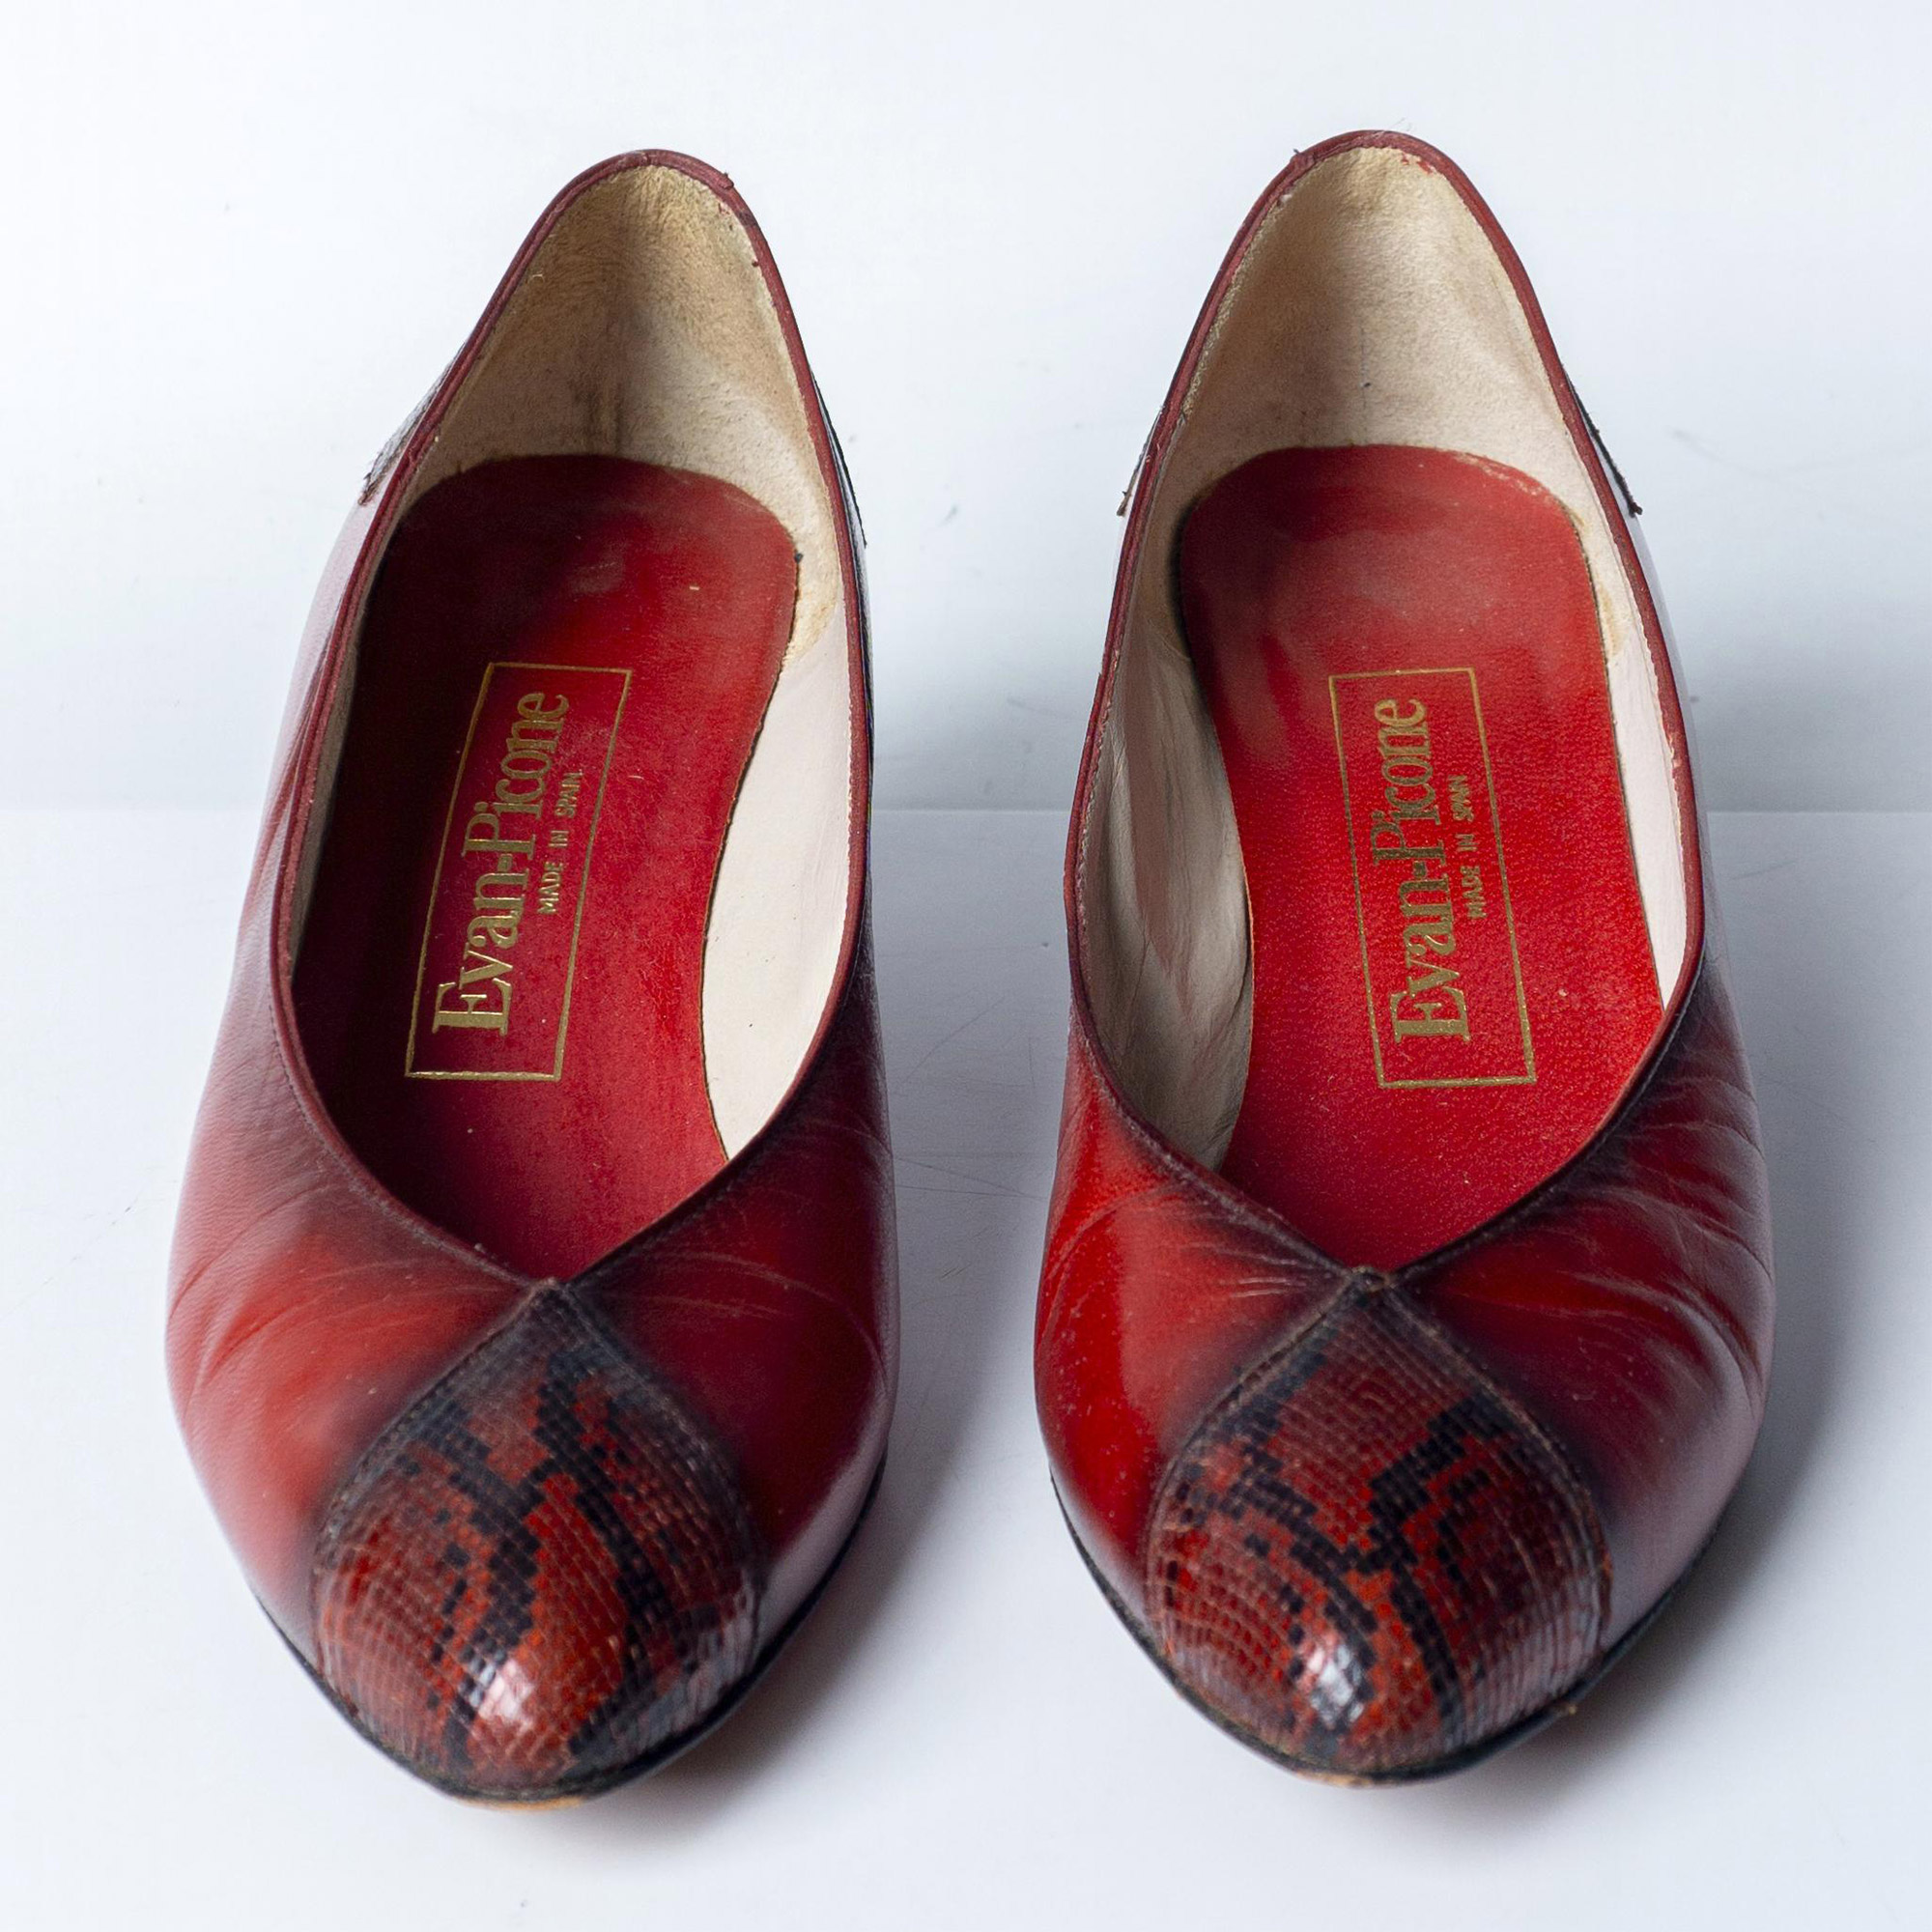 Handmade Evan-Picone Spain Red Leather Ladies Dress Shoes - Image 2 of 4